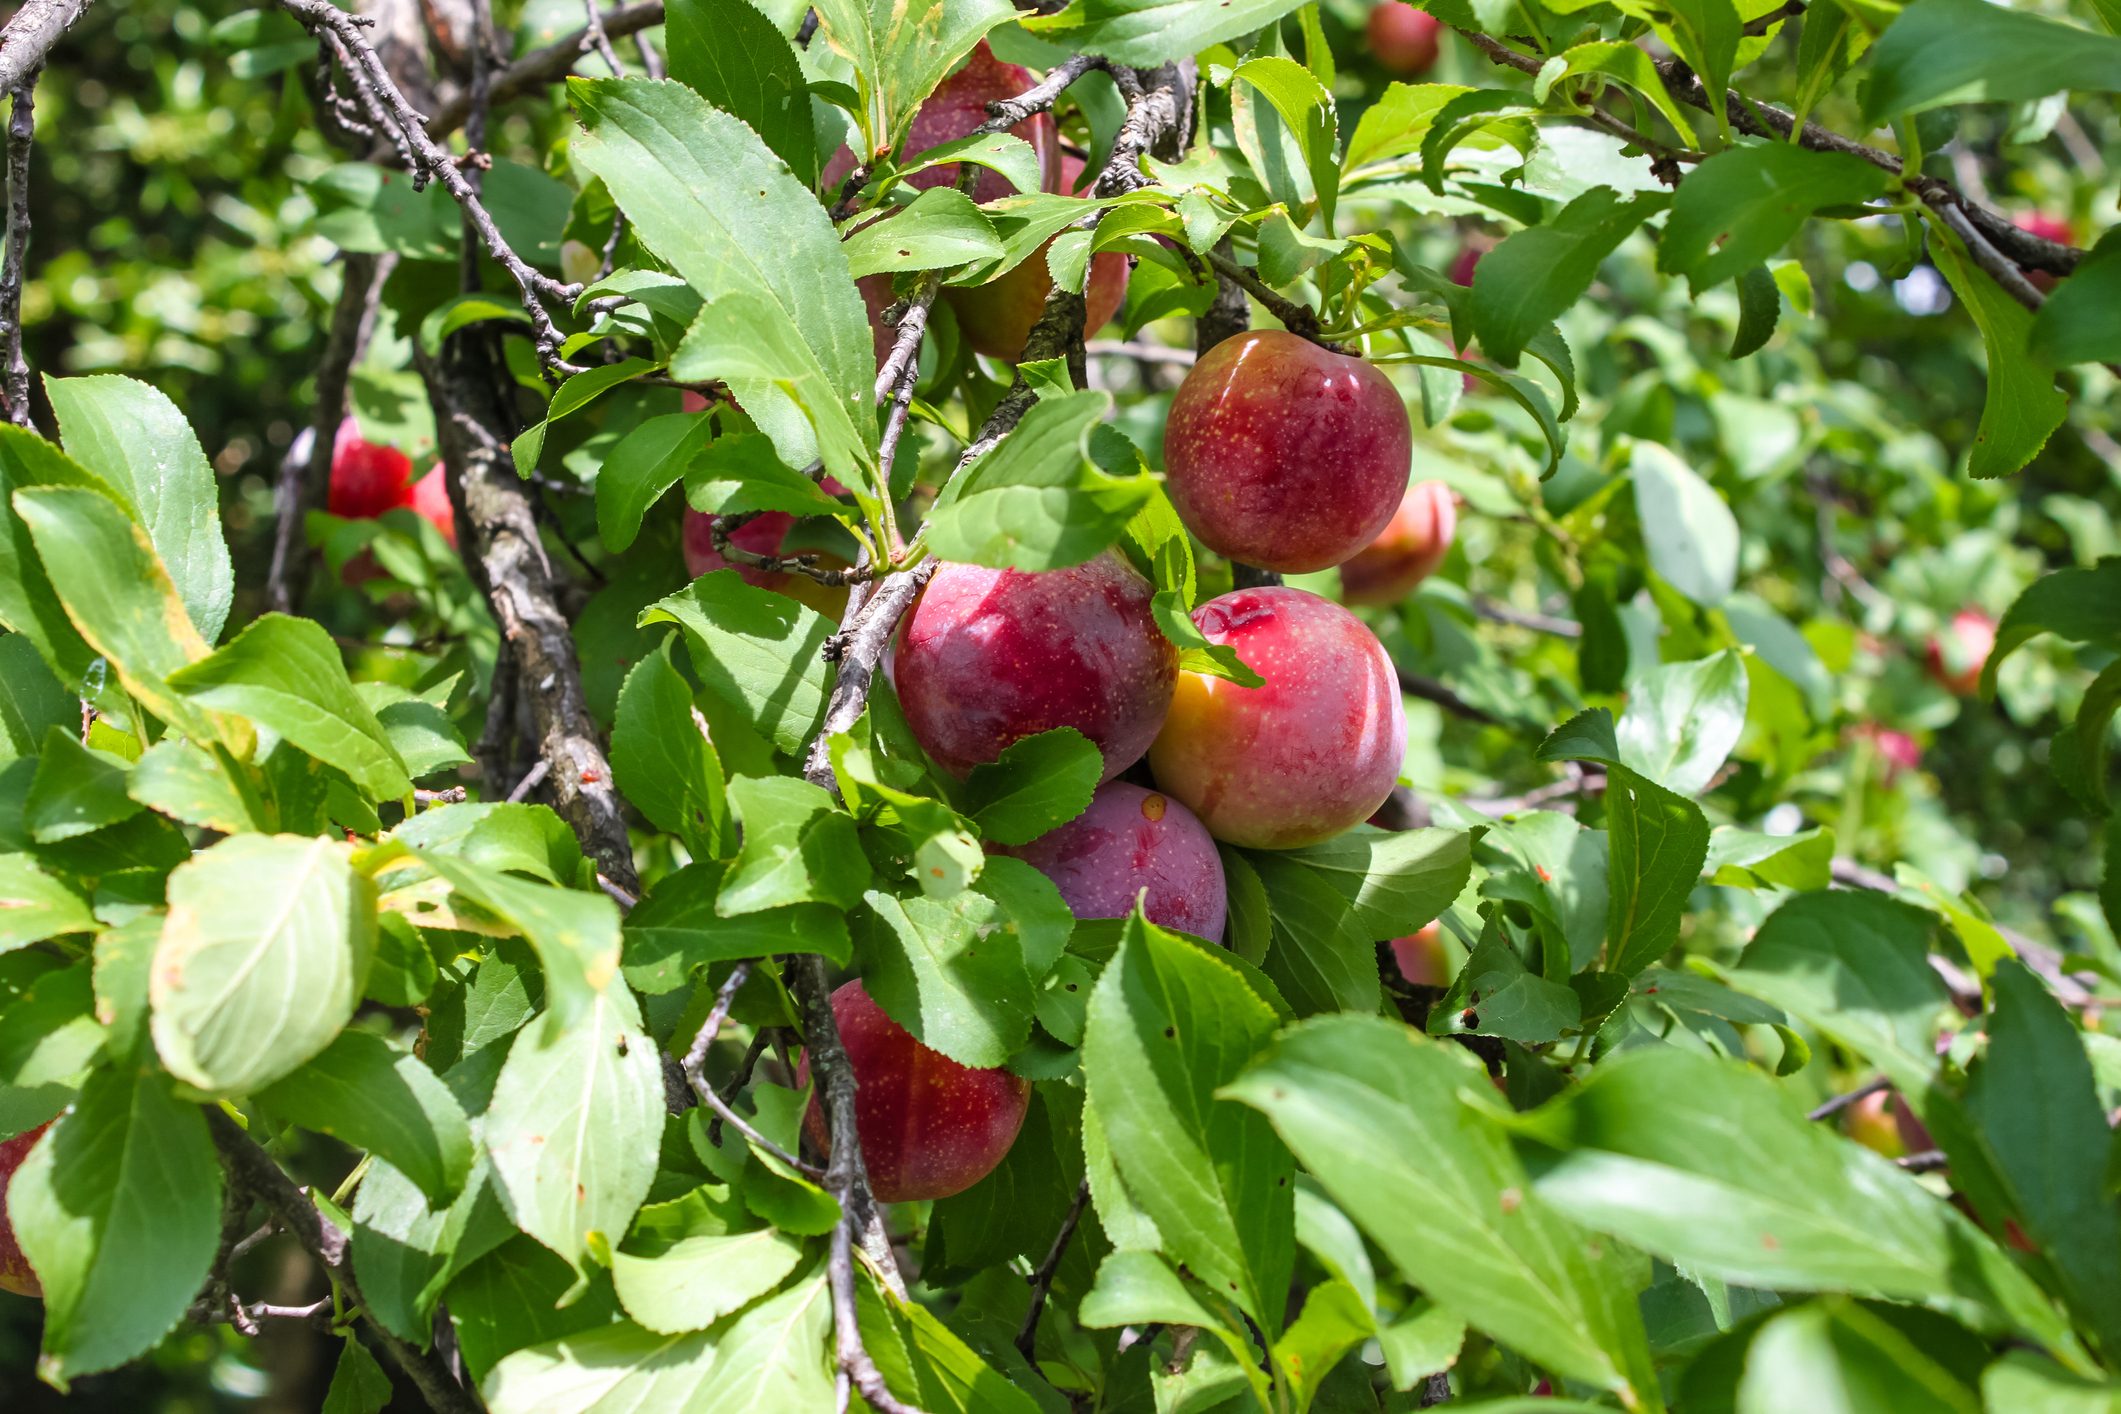 A bunch of ripe plums on a tree with bright green leaves and blurred fruit